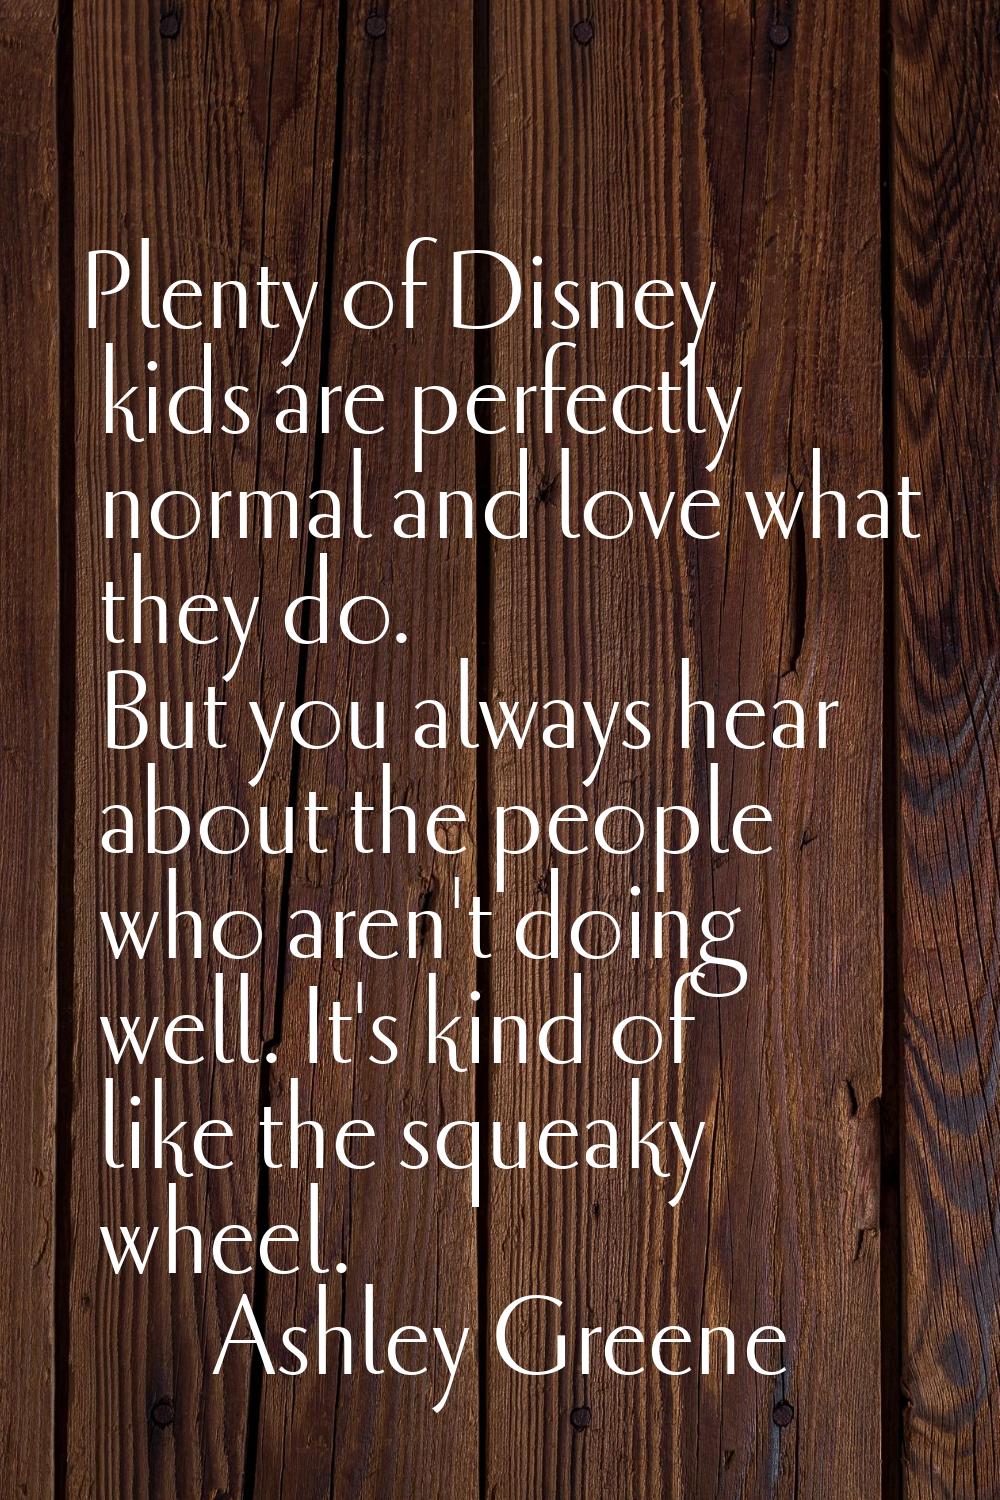 Plenty of Disney kids are perfectly normal and love what they do. But you always hear about the peo